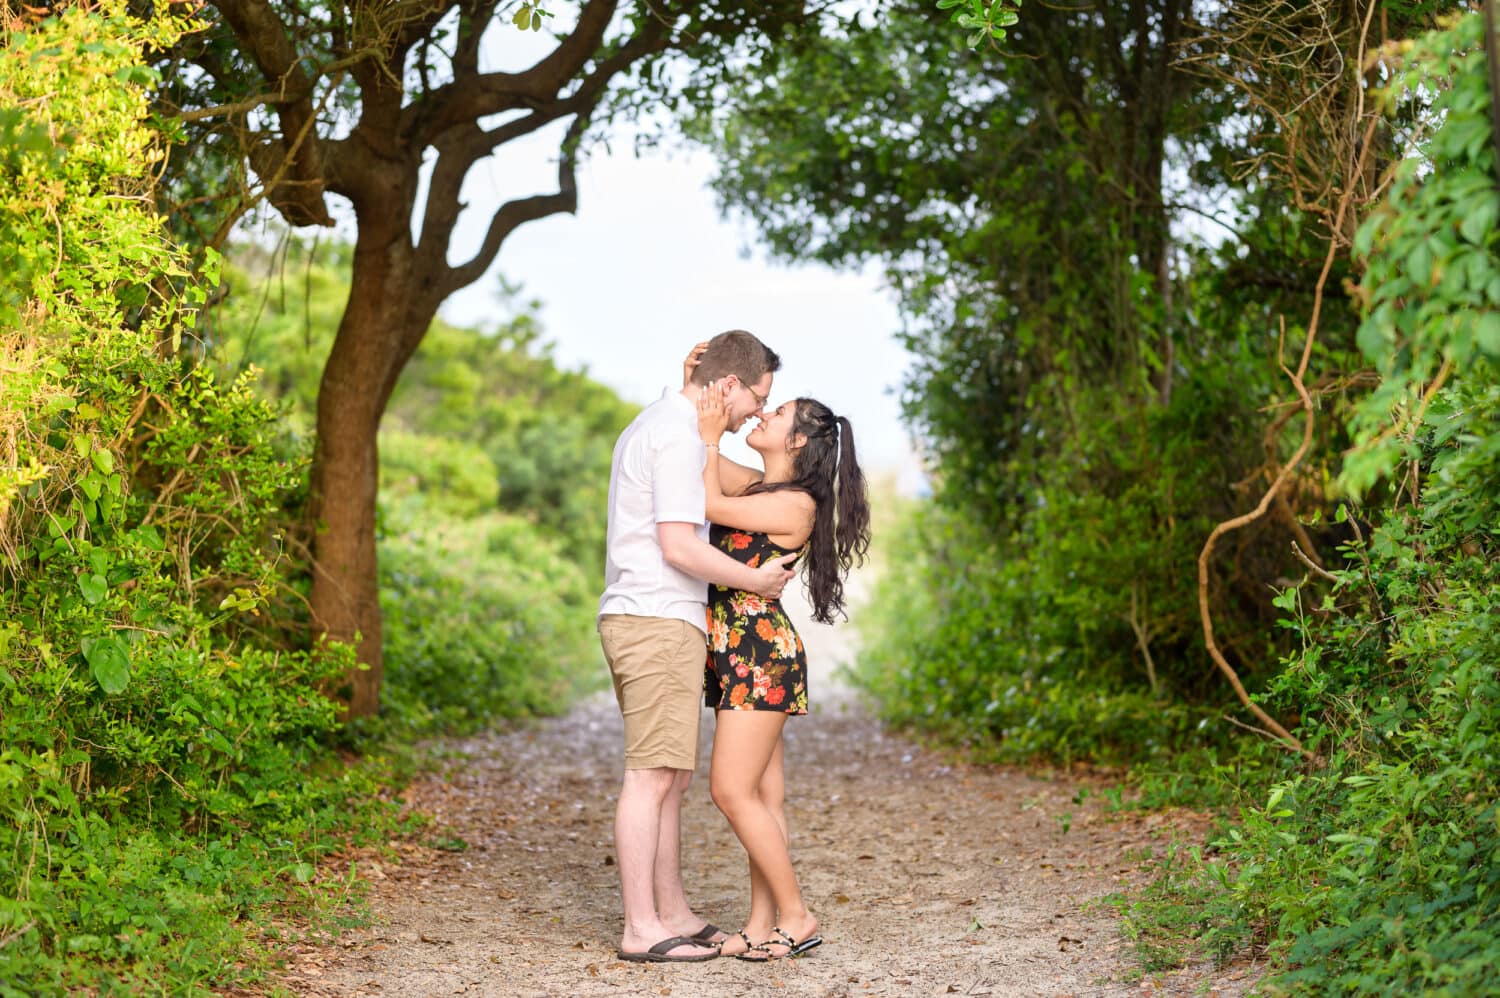 Pulling in for a kiss surrounded by the greenery on the beach walkway - Huntington Beach State Park - Myrtle Beach